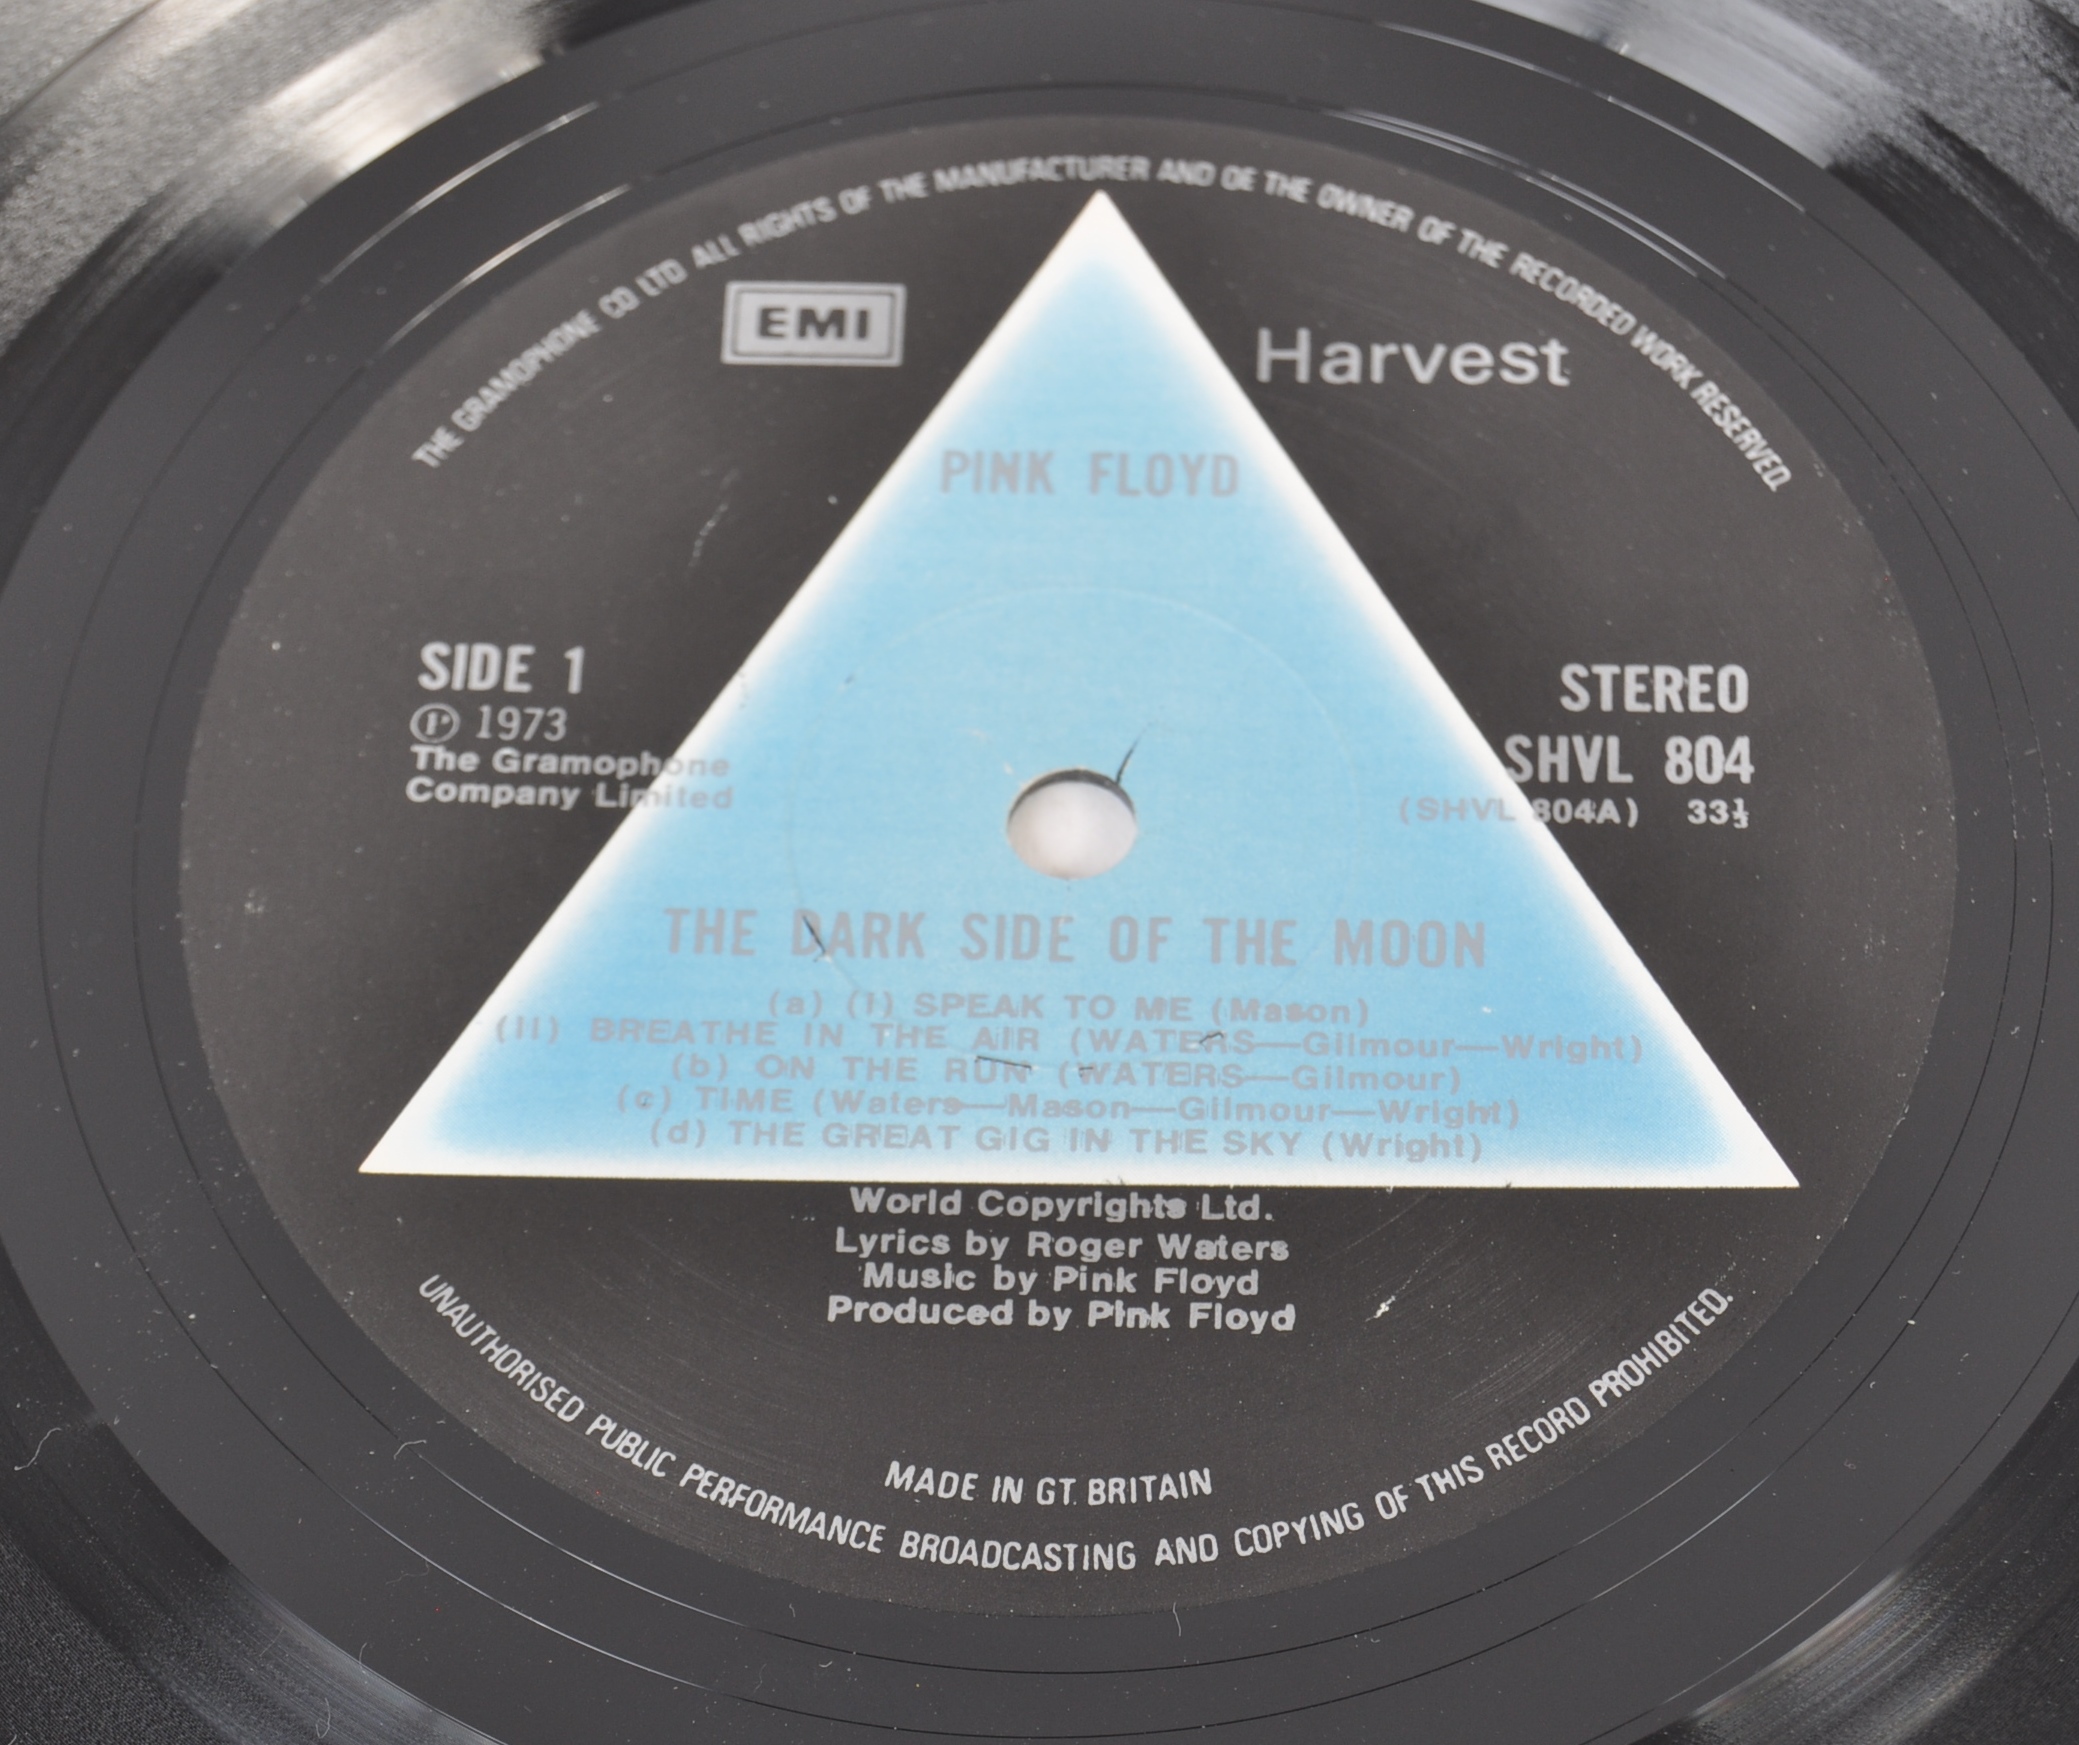 PINK FLOYD - THE DARK SIDE OF THE MOON - 'SOLID BLUE' FIRST UK 1973 PRESS - Image 4 of 6